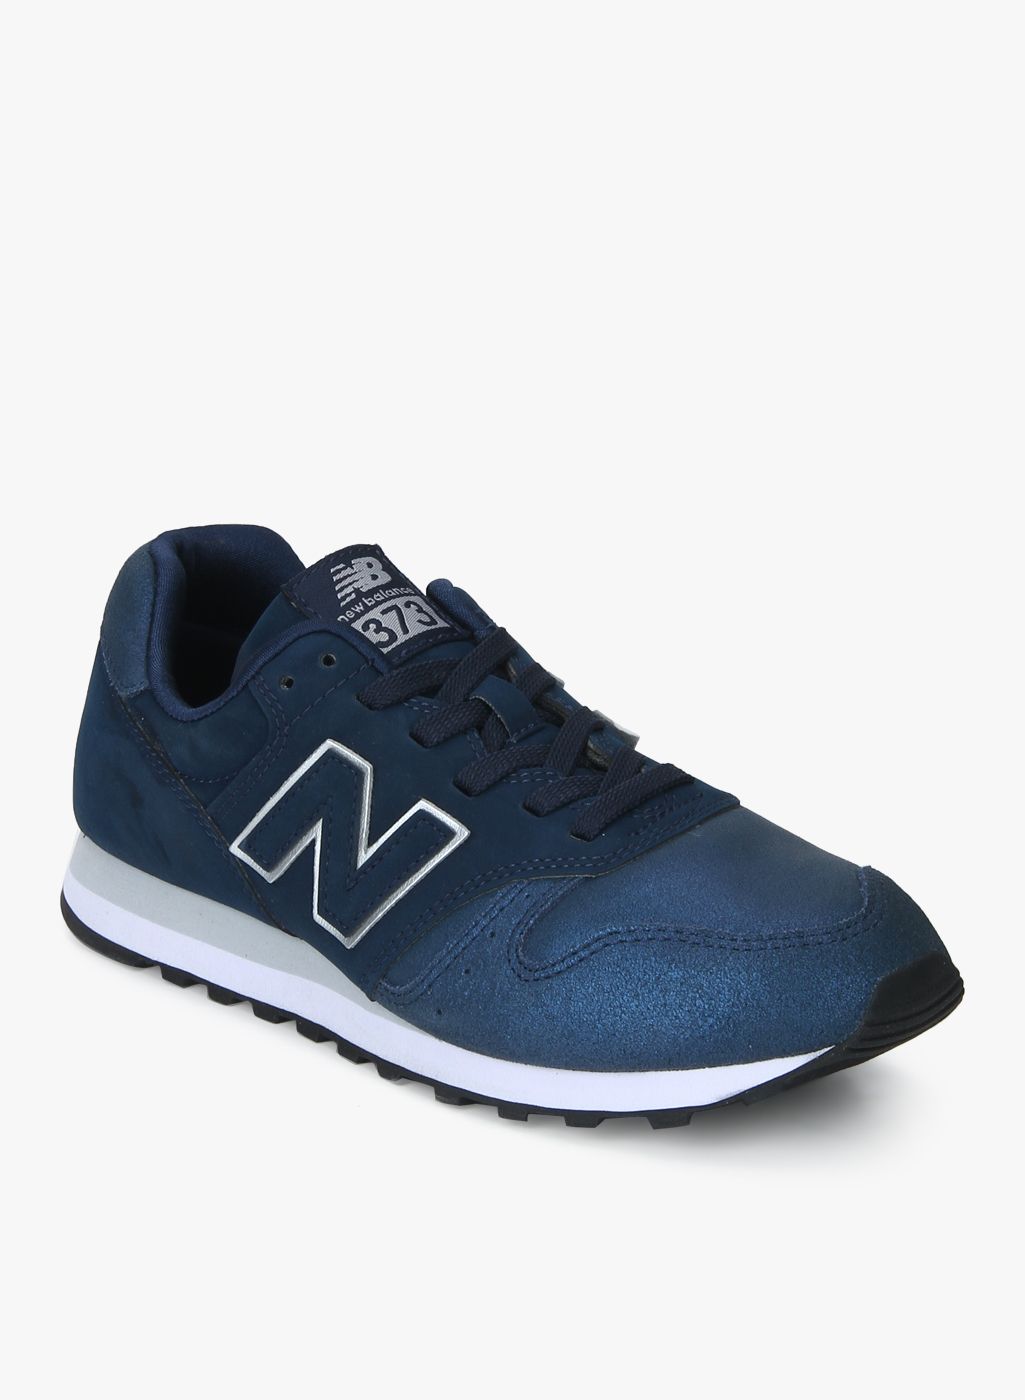 Buy New Balance 373 Navy Blue Sneakers 